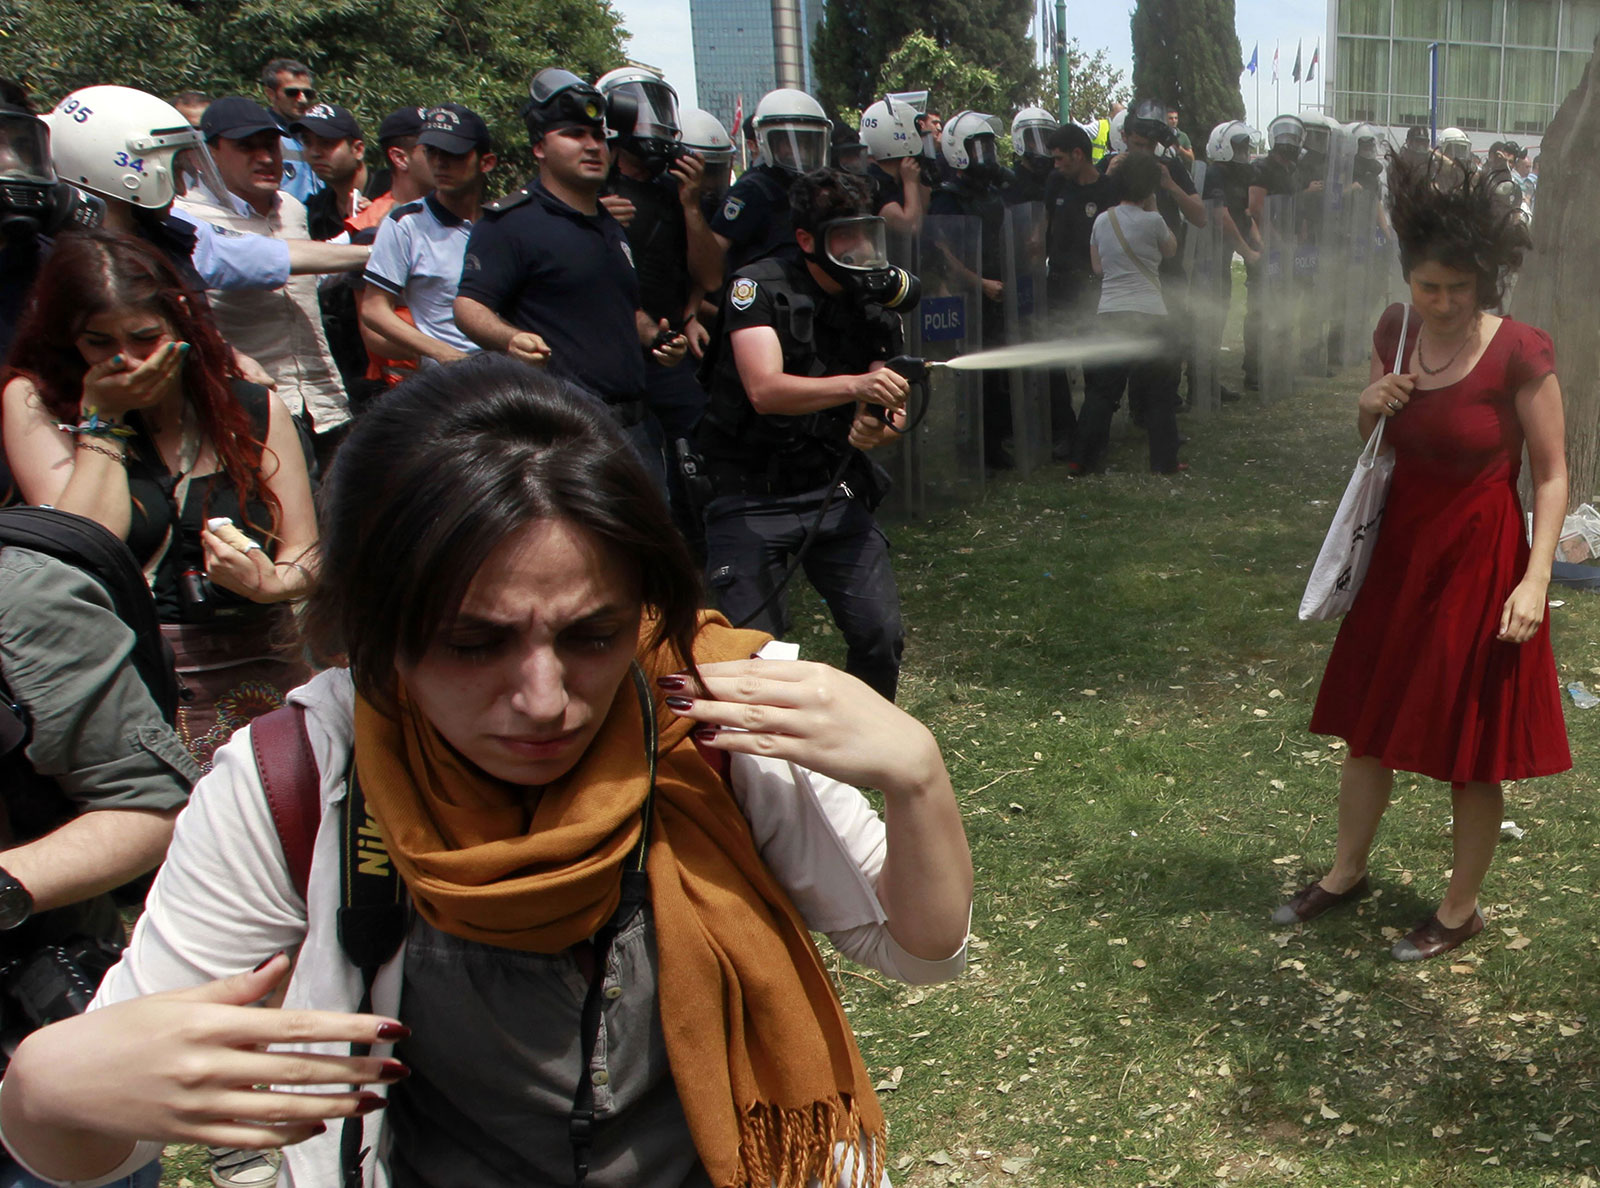 A woman is peper-sprayed at Turkey's Gezi Park protest. 2013